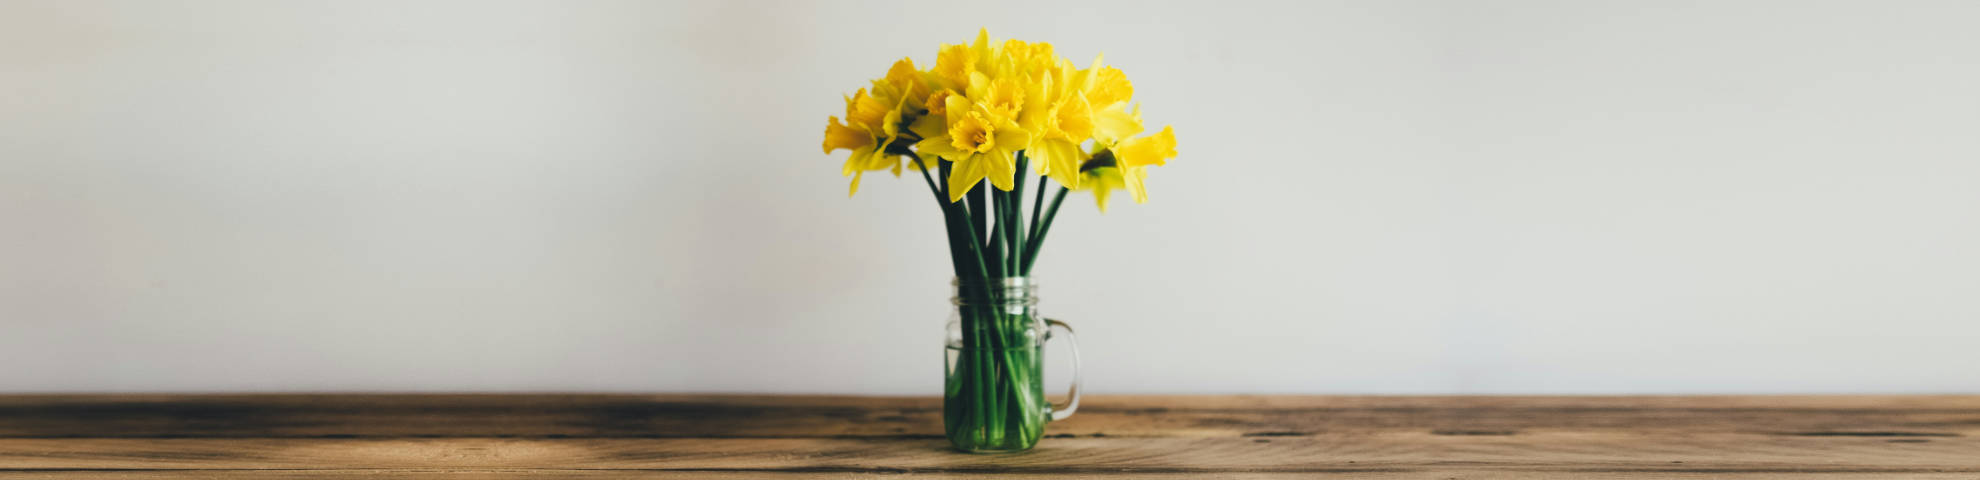 A bunch of daffodils in a glass vase on a wooden table